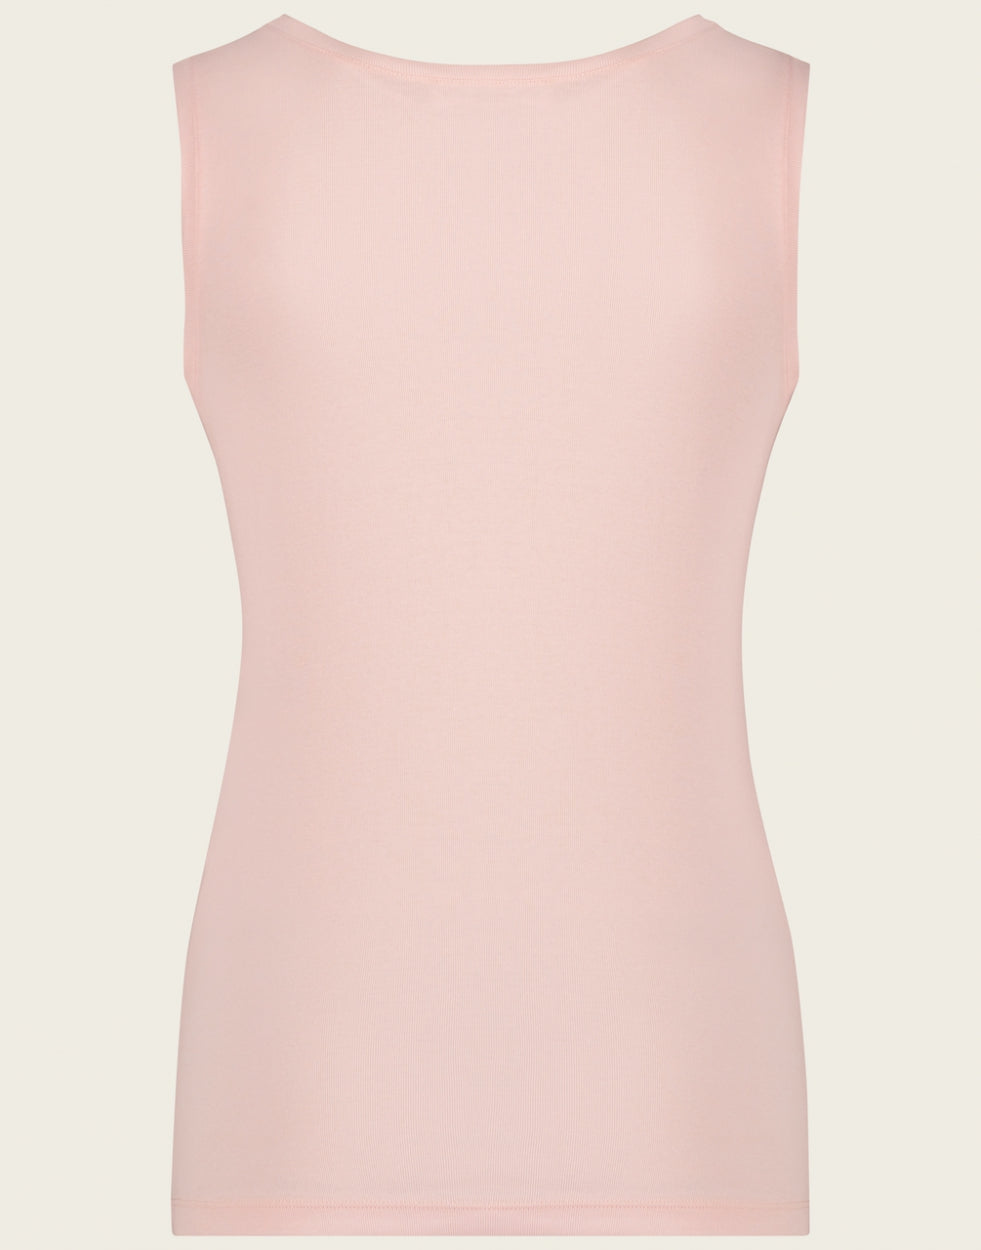 Top rips easy wear Organic Cotton | Pink